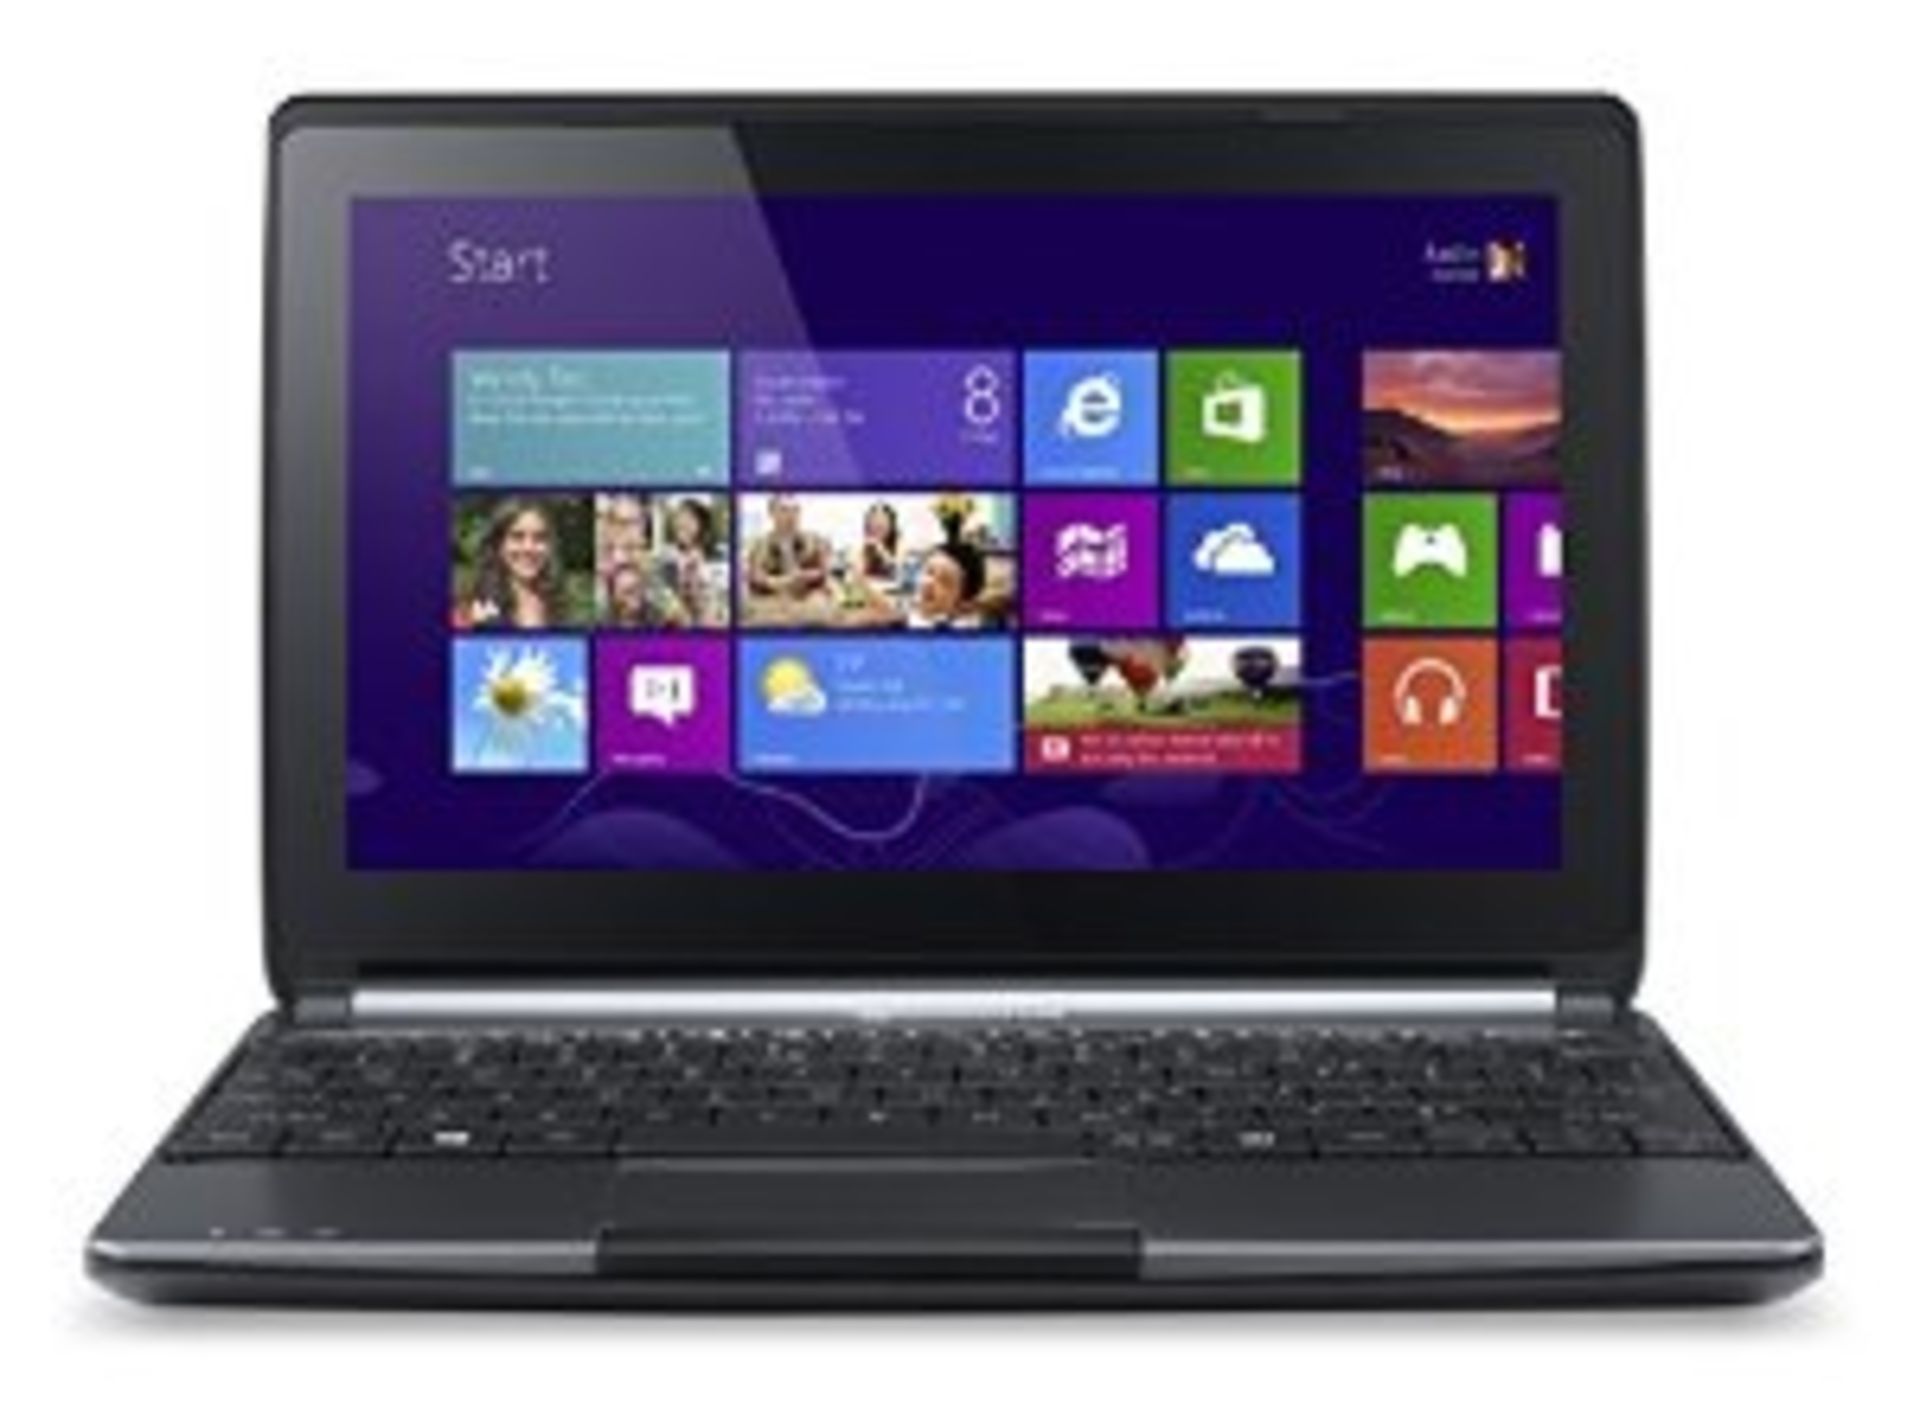 V PACKARD BELL EASYNOTE  10.1 inch TOUCHSCREEN  1.6GHZ  2GB  320GB  WIN 8.1